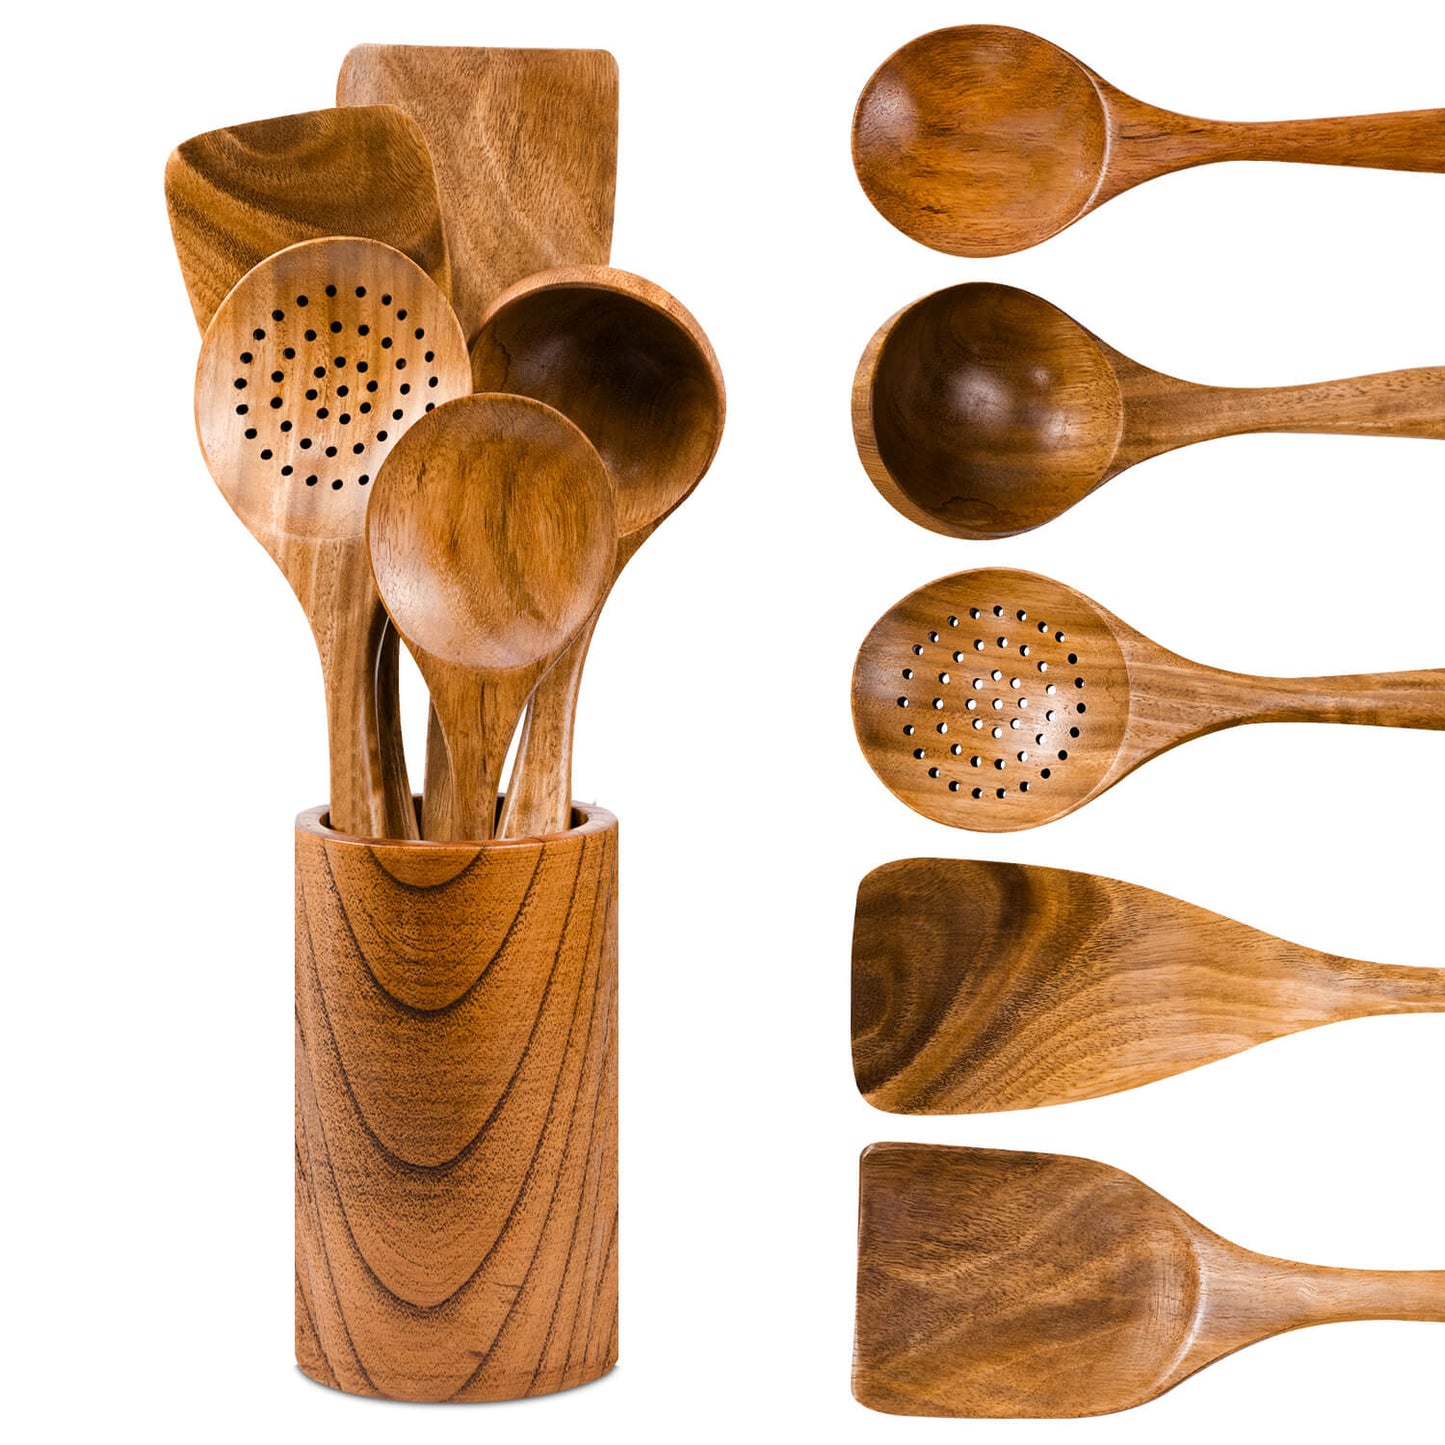 GL-Bamboo Acacia Wood Cooking Spoon Set With Utensils Holder